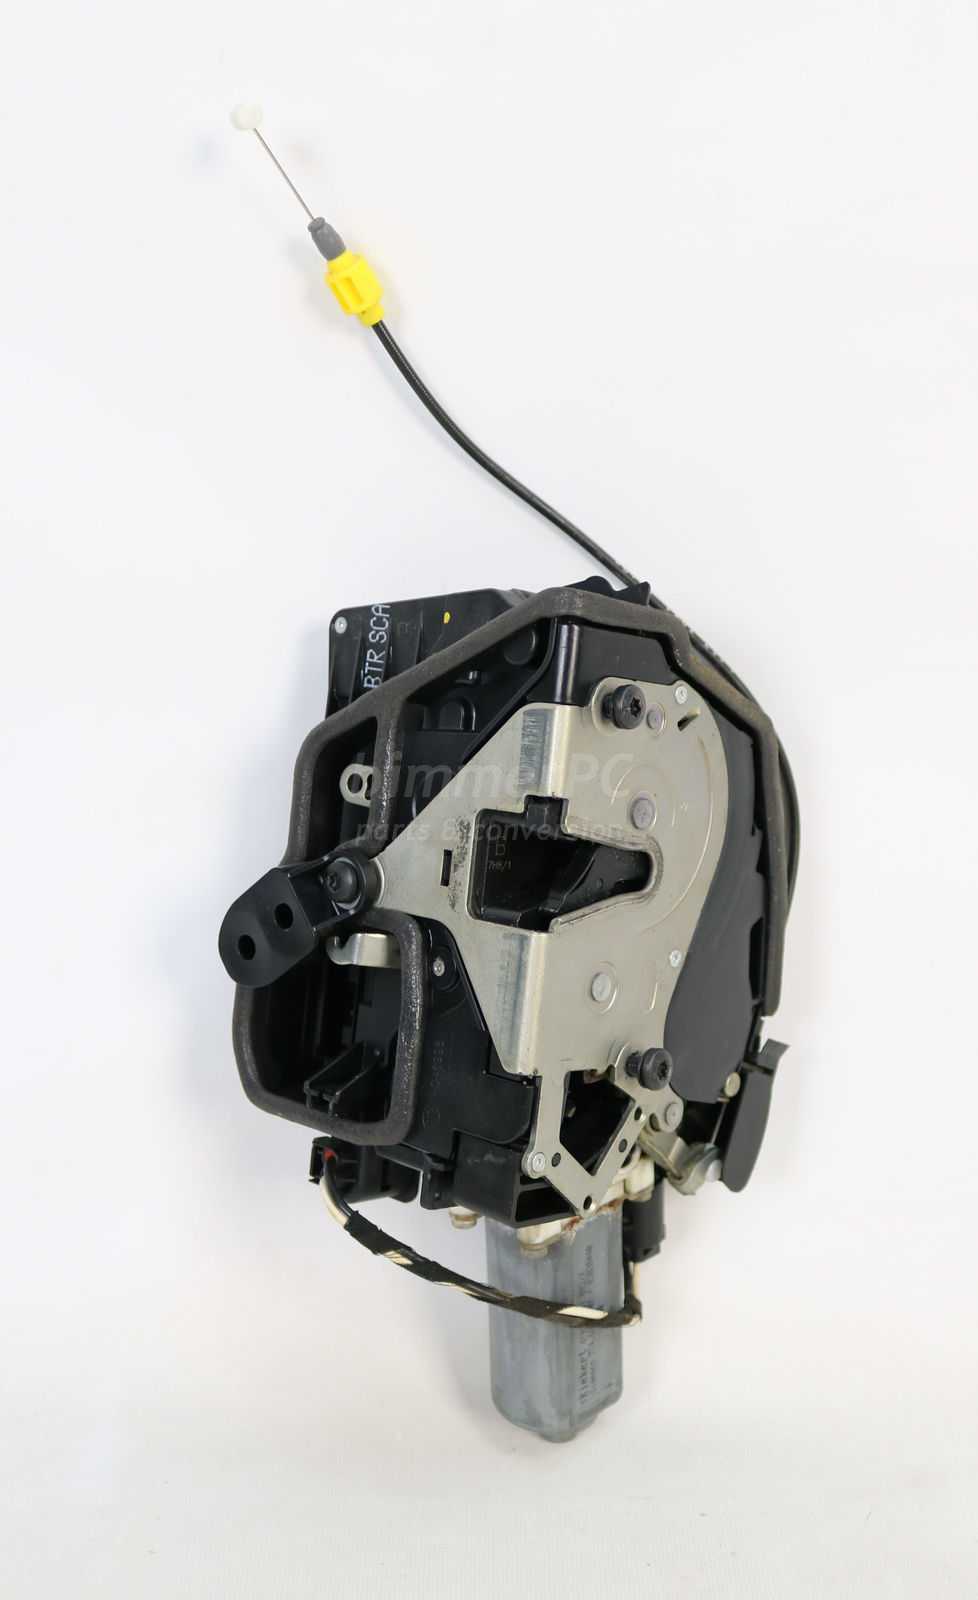 BMW E66 7-Series E65 Right Front Door Latch Power Lock Soft Close 2002-2008 OEM - $197.01